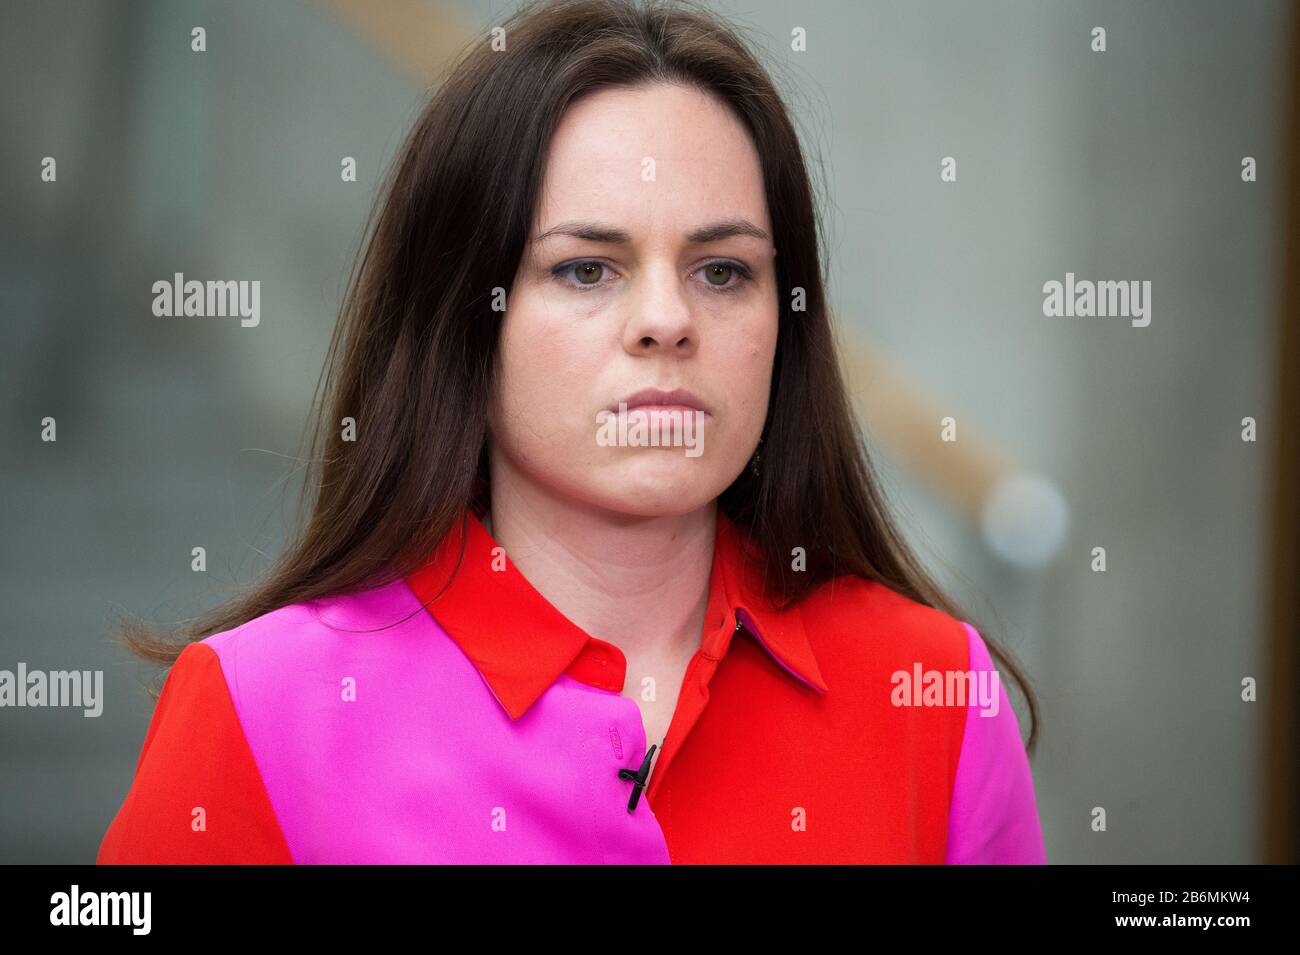 Edinburgh, UK. 11th Mar, 2020. Pictured: Kate Forbes MSP - Cabinet Secretary for Finance, Scottish National party (SNP). Scenes from inside the Scottish Parliament. Credit: Colin Fisher/Alamy Live News Stock Photo